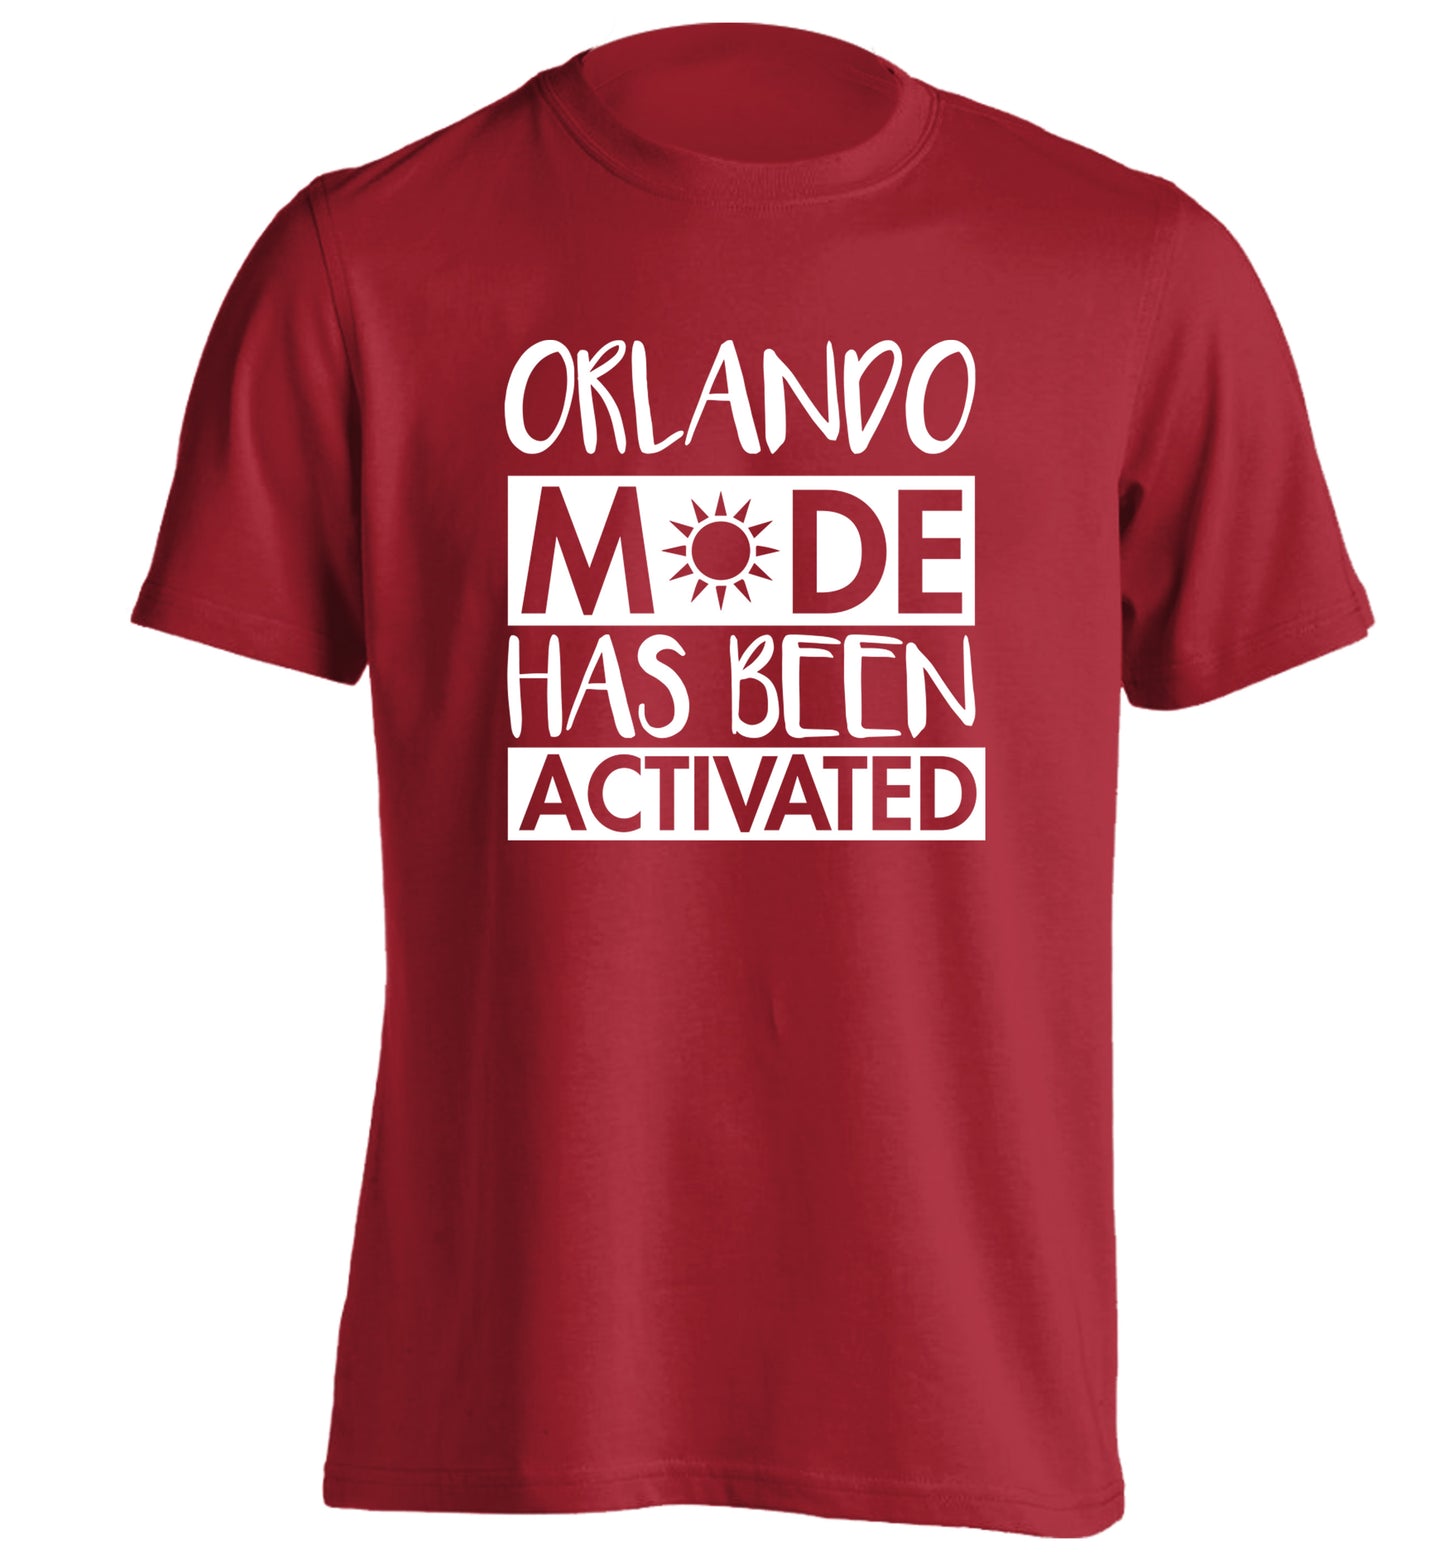 Orlando mode has been activated adults unisex red Tshirt 2XL